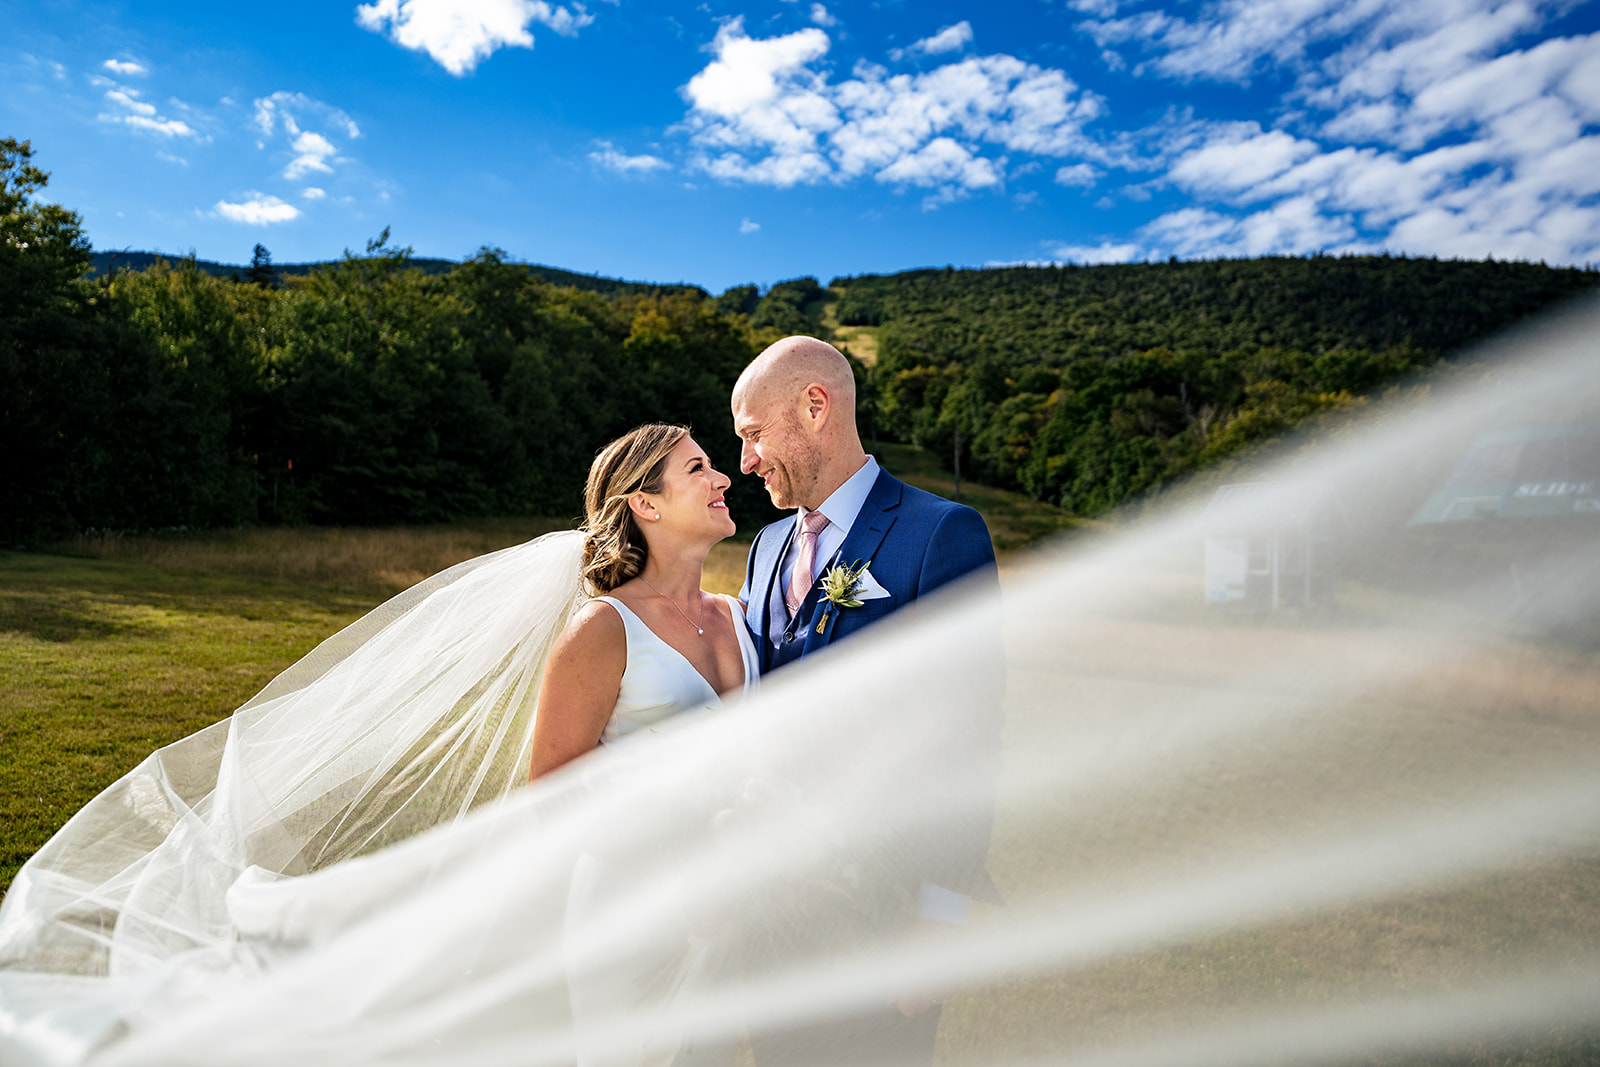 beautiful portrait of bride and groom in the mountains of vermont